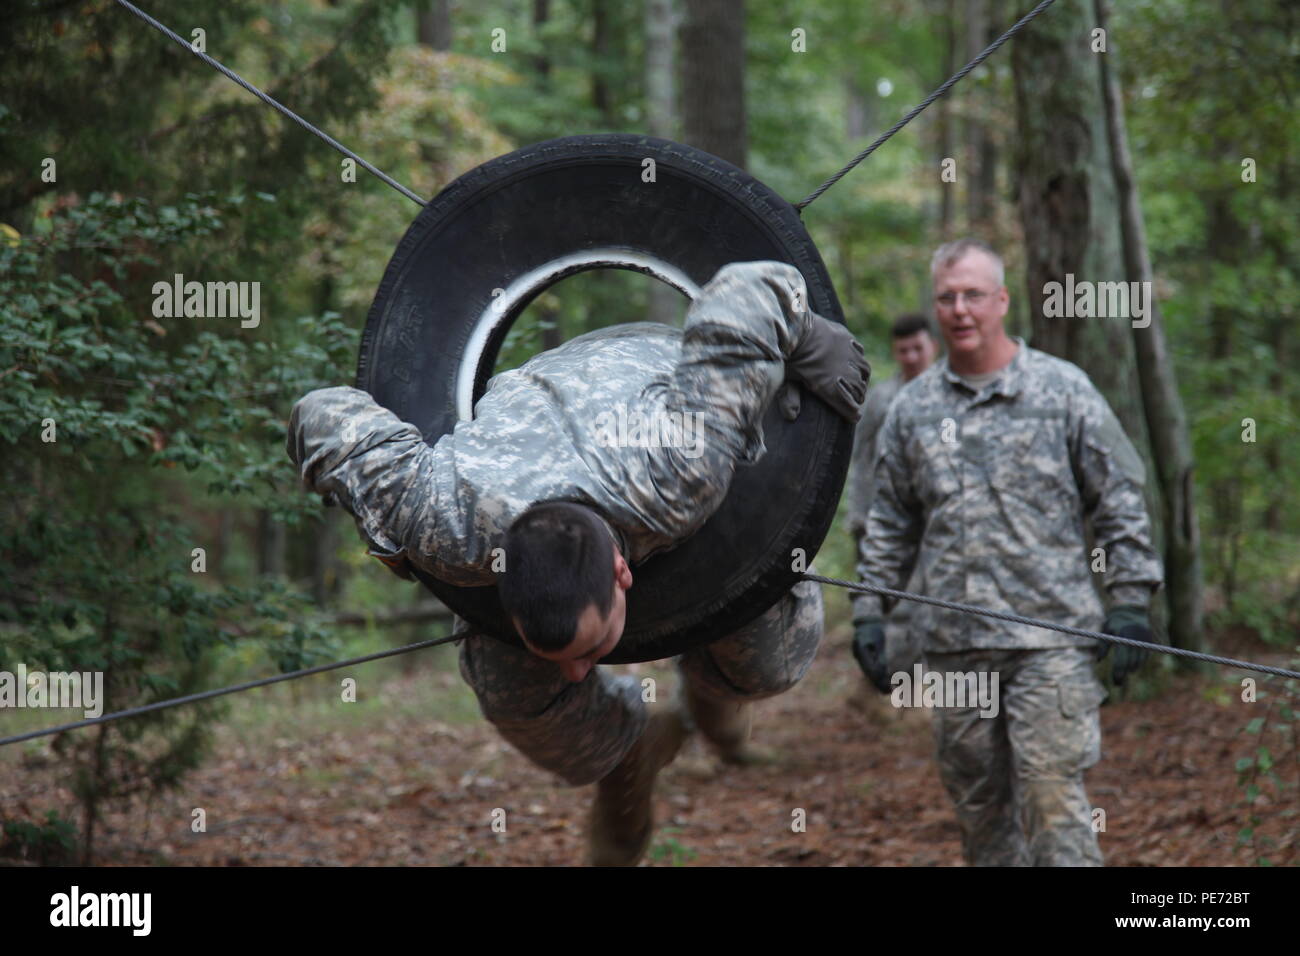 U.S. Army Sgt. Robert Sheets, assigned to 55th Signal Company (Combat Camera), jumps through a tire during a wire obstacle course as part of a Field Training Exercise (FTX) at Fort AP Hill, Va., Sept. 28, 2015. The 55th Signal Company conducts a FTX twice a year in order to maintain tactical proficiency, as well as to develop and prepare Soldiers for the rigor of combat. (U.S. Army photo by Pfc. Elliott Page/Released). Stock Photo